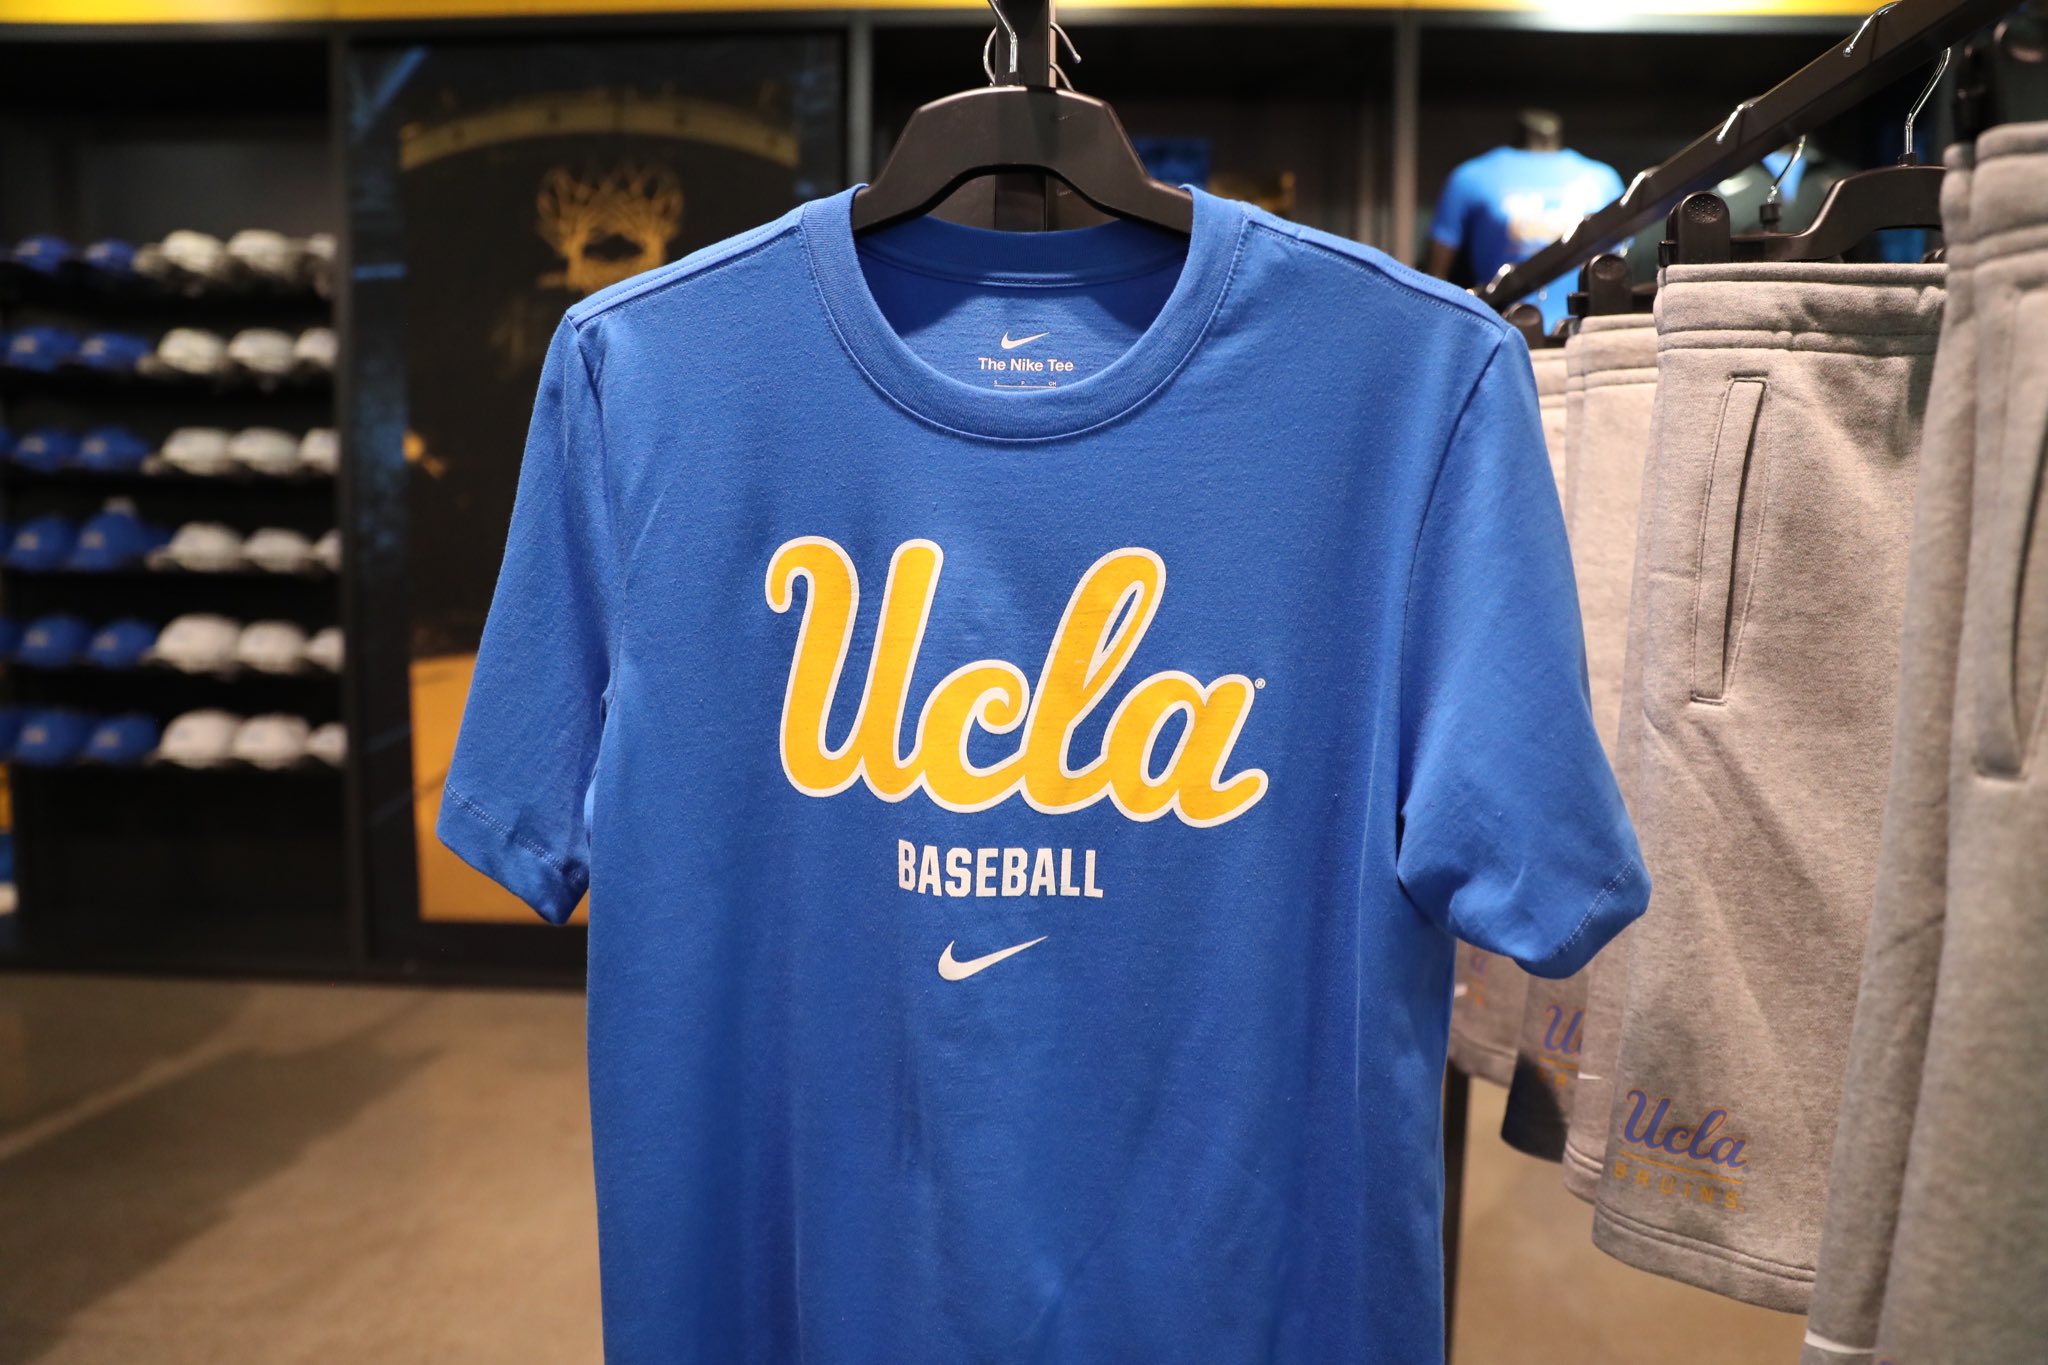 Universidad Mezclado Nido Twitter 上的UCLA Baseball："It's a new day! Nike gear is now available on  campus at the UCLA Store. #GoBruins https://t.co/oLefIyy4wO" / Twitter